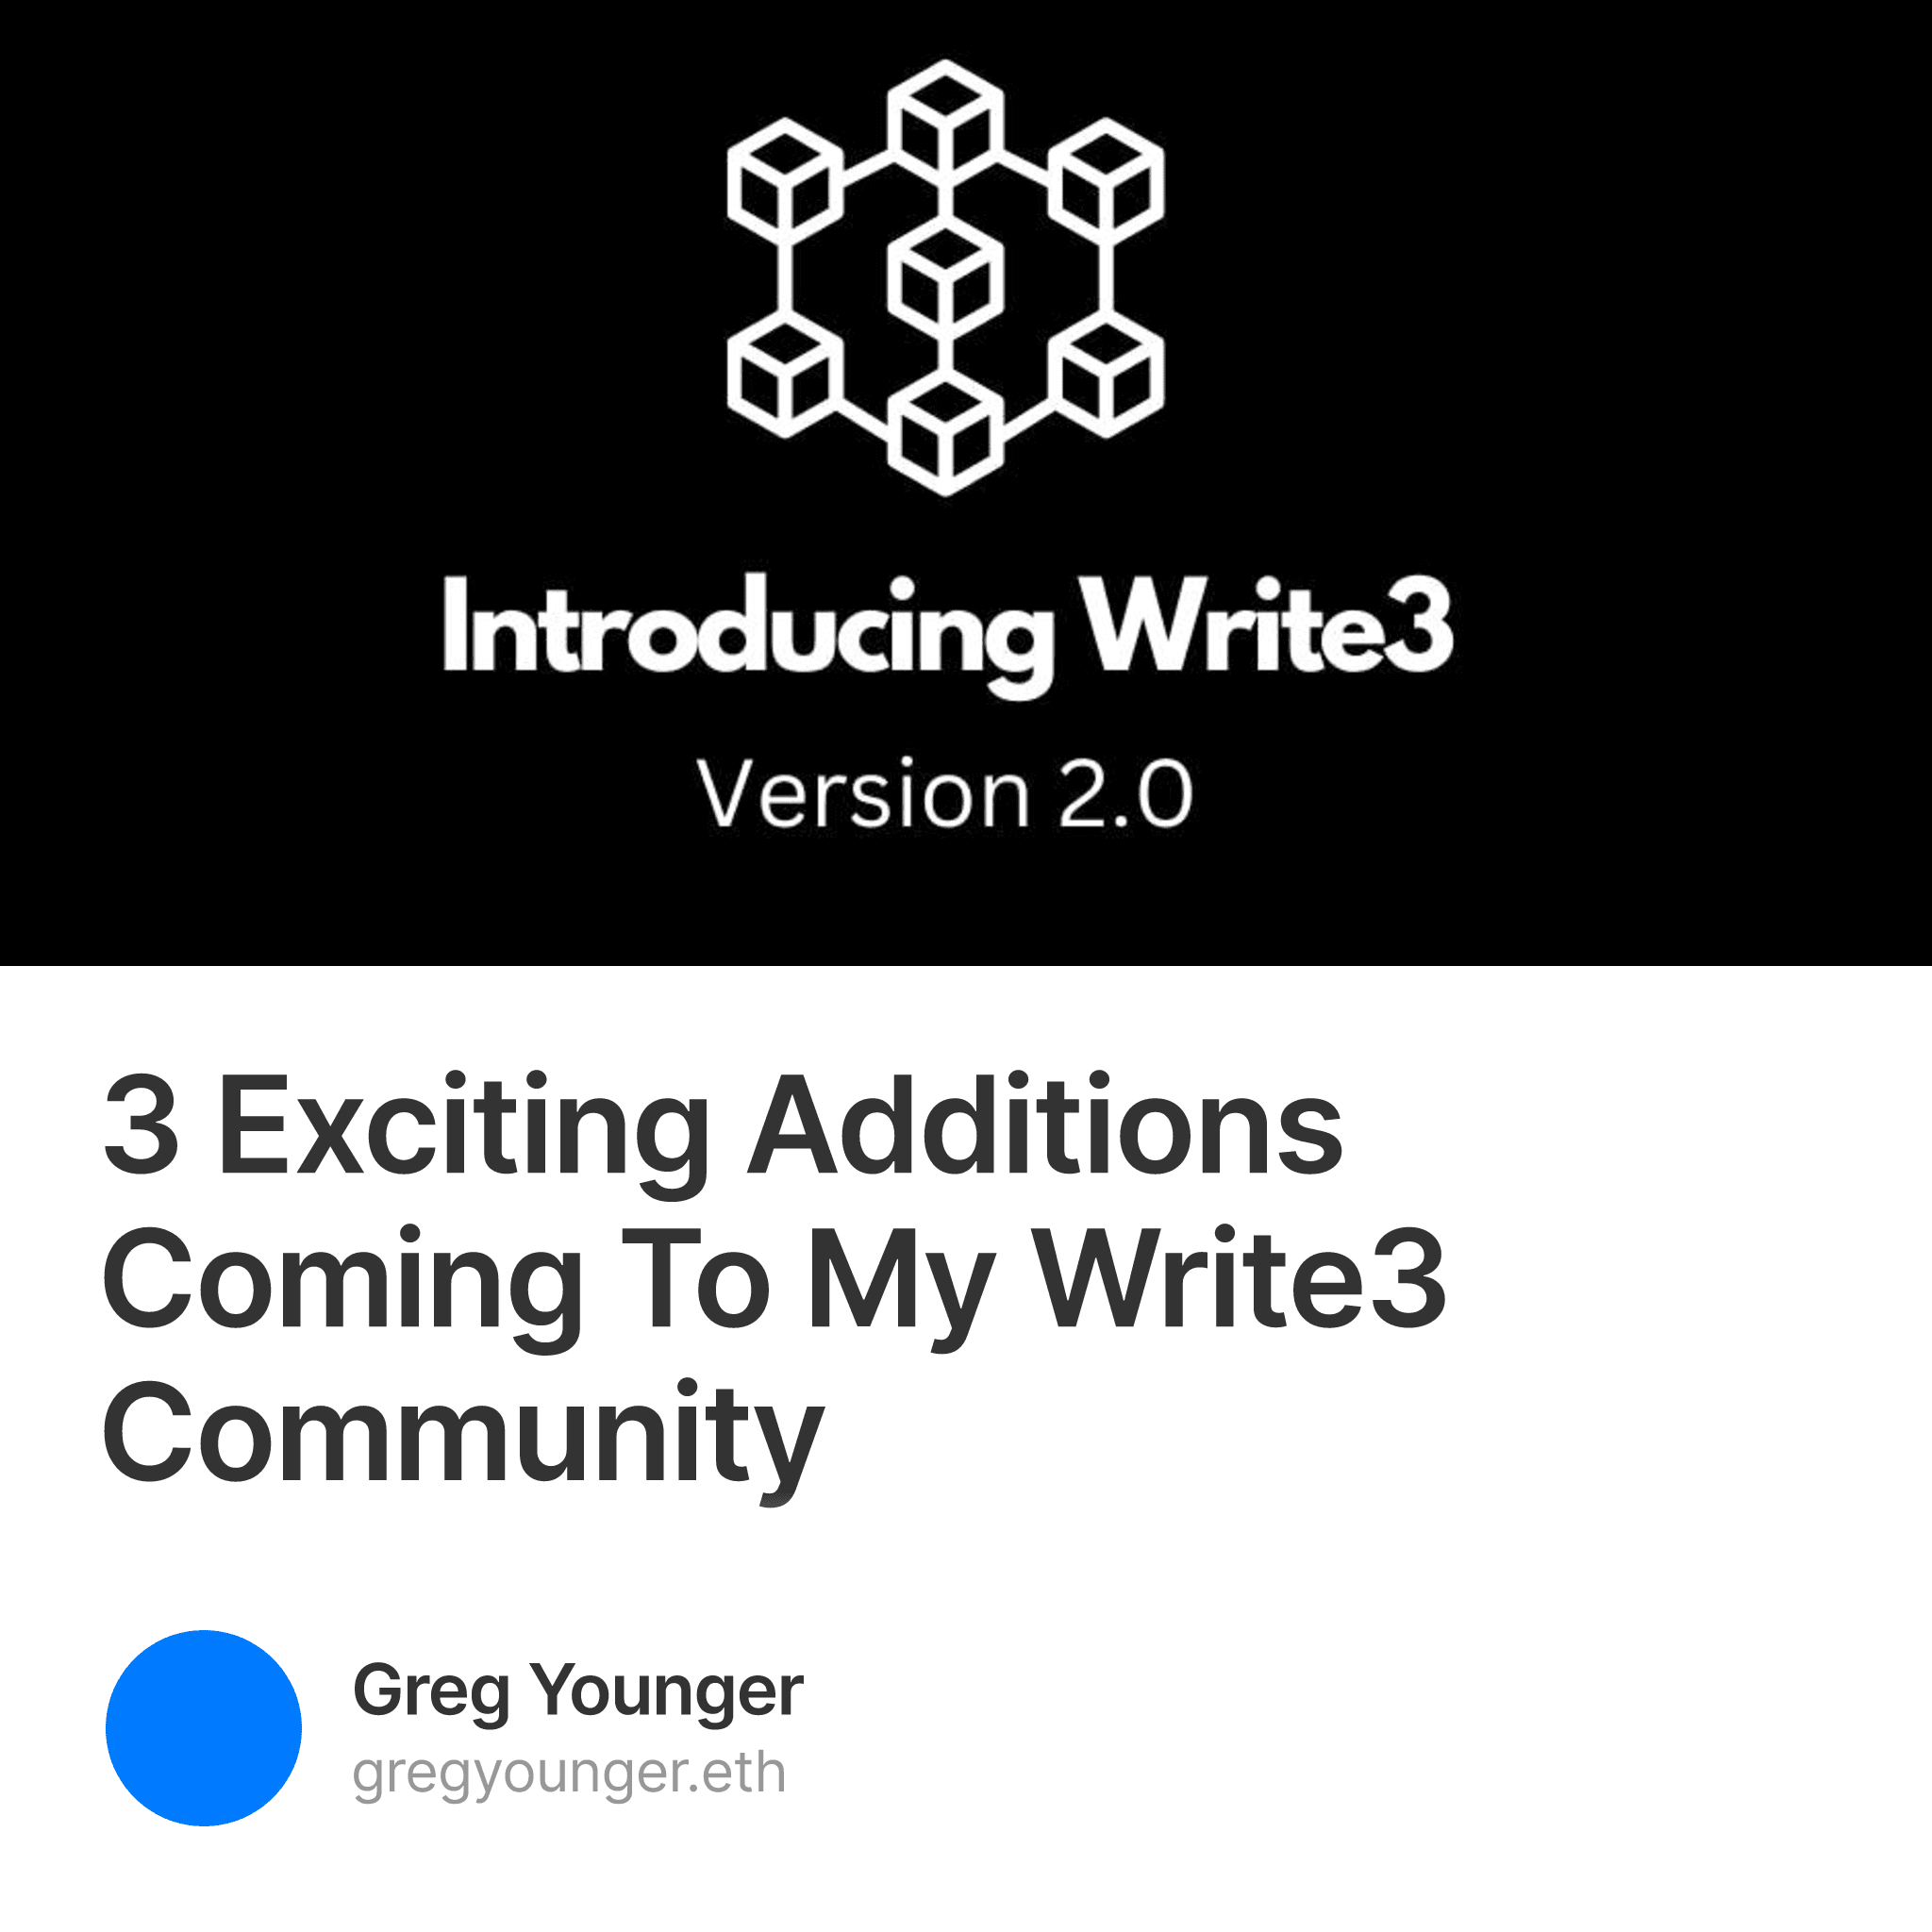 3 Exciting Additions Coming To My Write3 Community 2/9